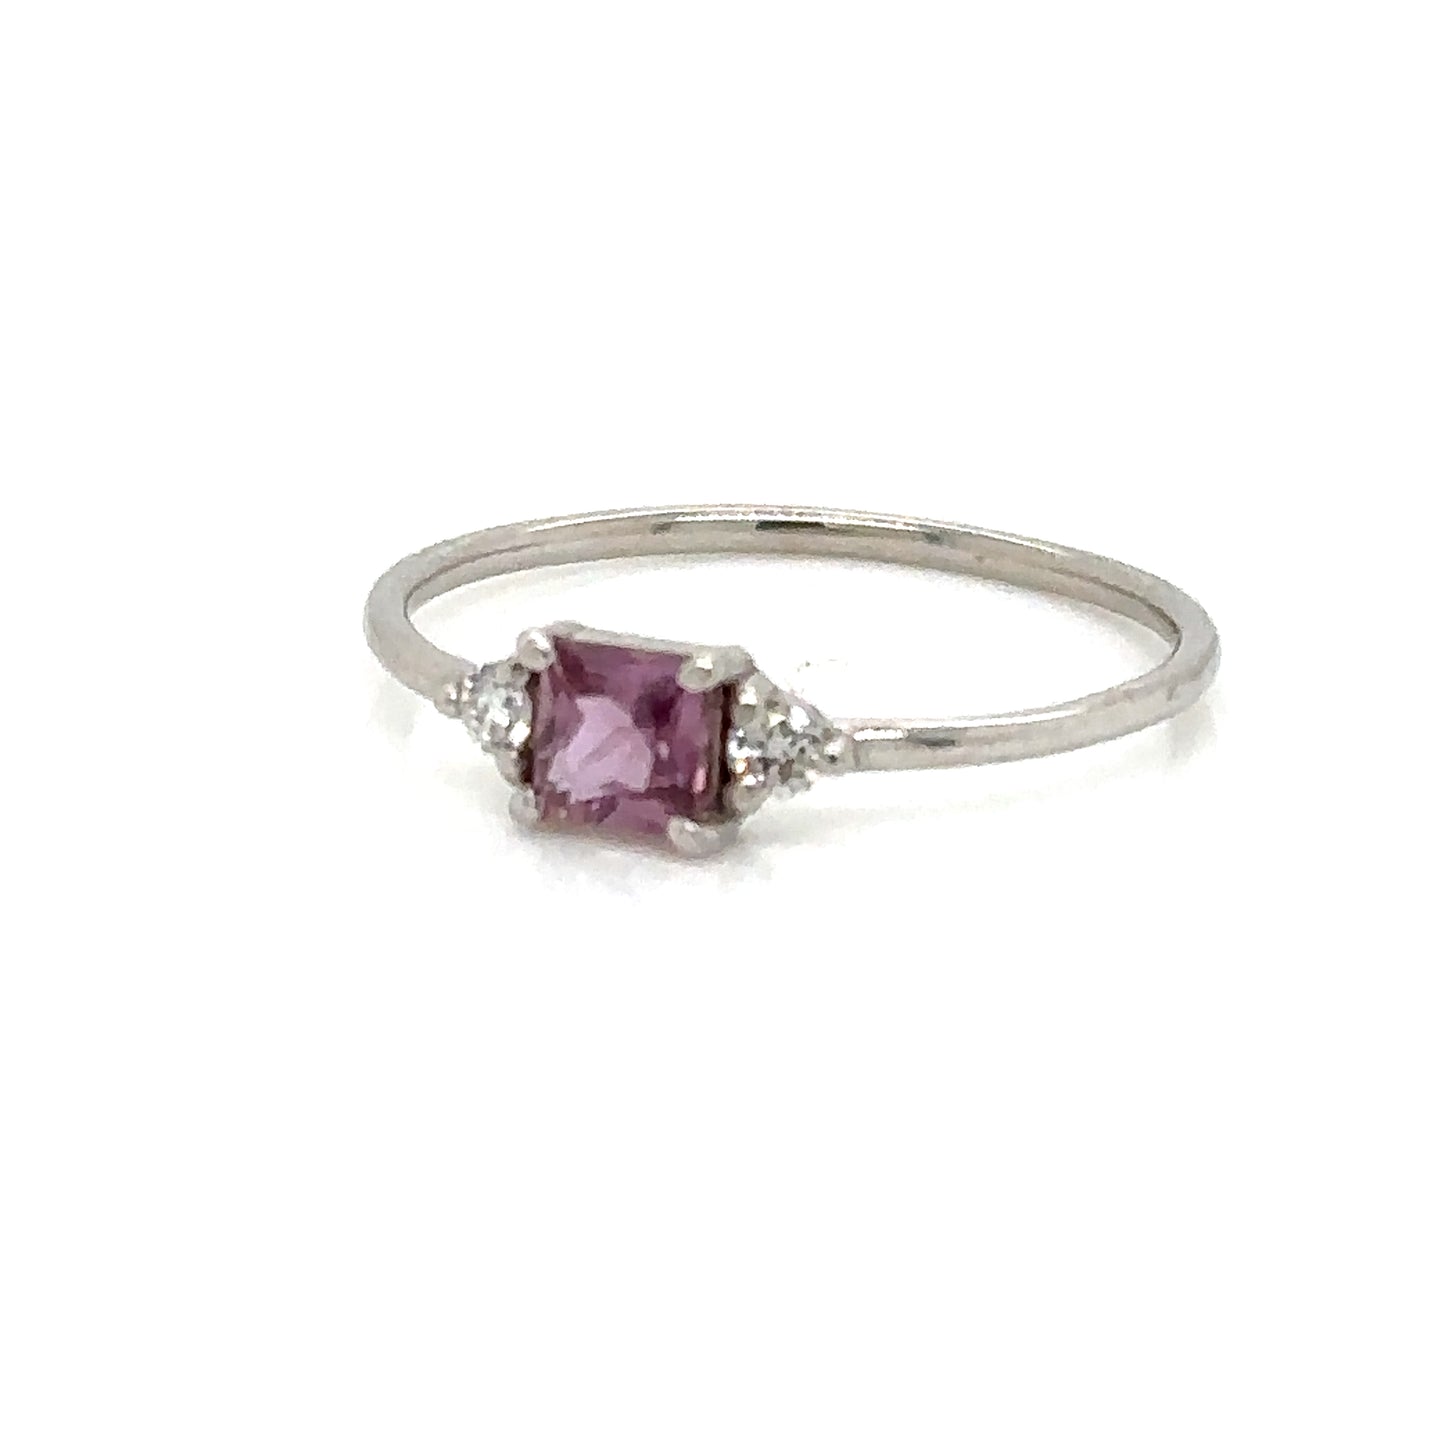 IMMEDIATE DELIVERY / Unique Piece / Princess Cut Pink Sapphire Ring with Diamonds / 14k white gold / size 5.5